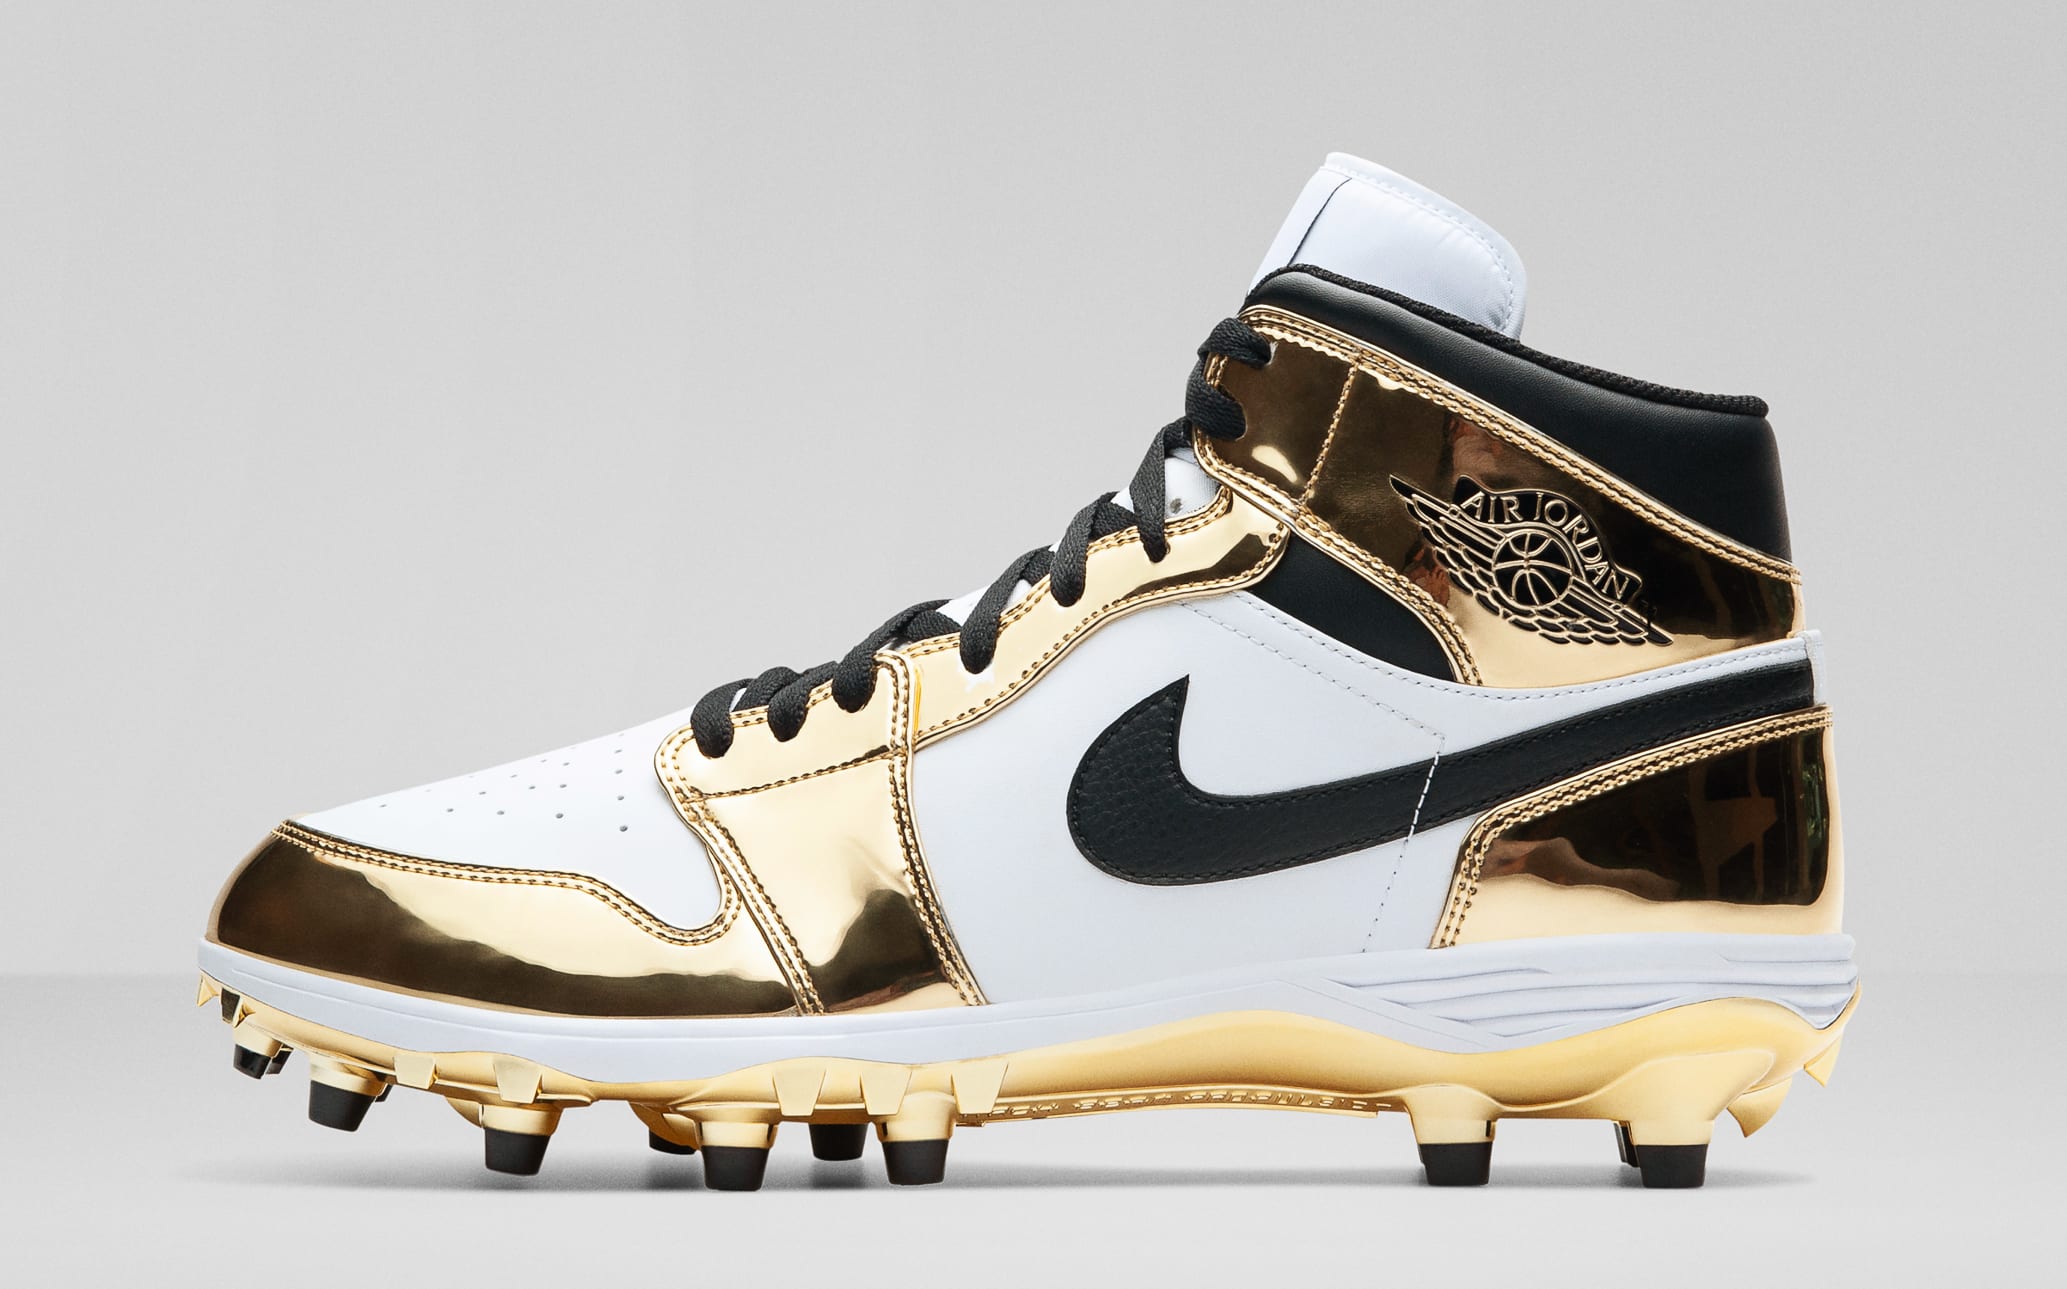 Air Jordan 1 TD PE Cleats for NFL Opening Day | Sole Collector